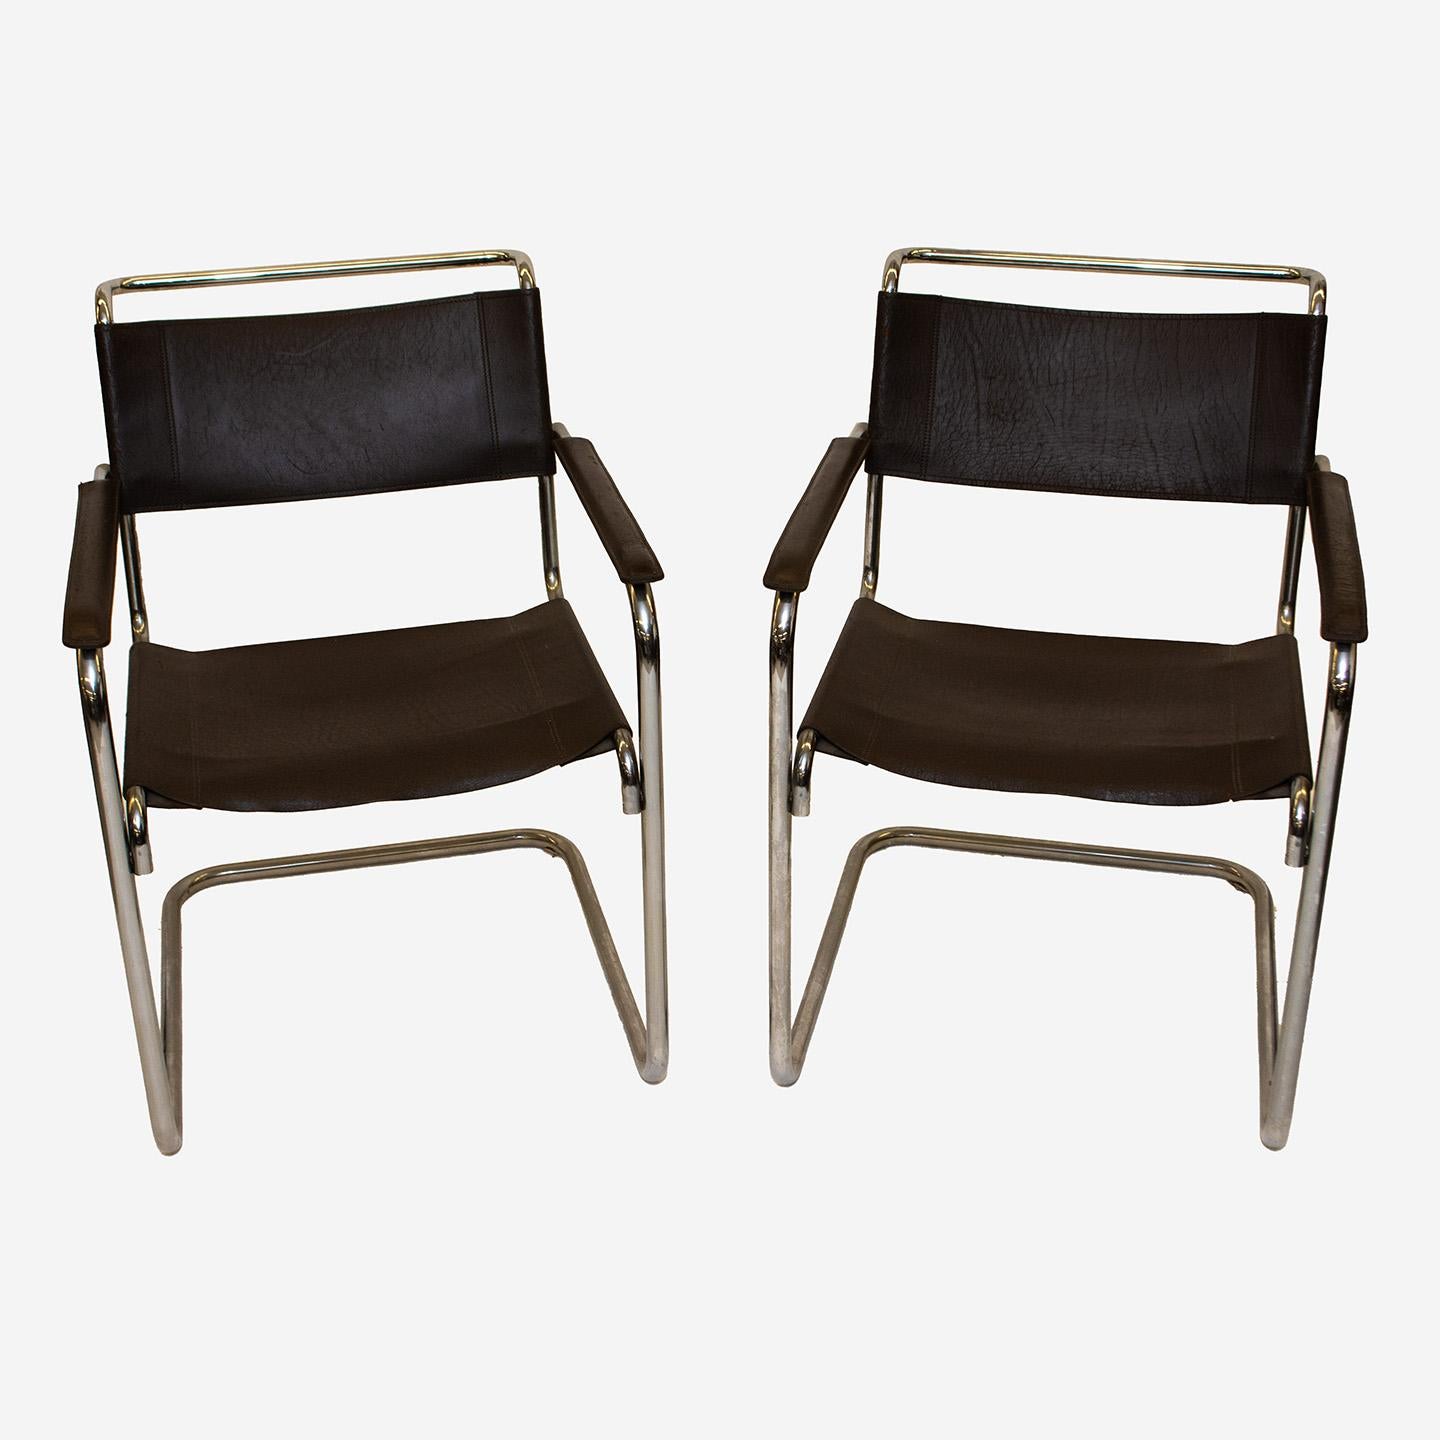 Mid-20th Century B34 Bauhaus Leather Arm Chairs by Marcel Breuer, Pair